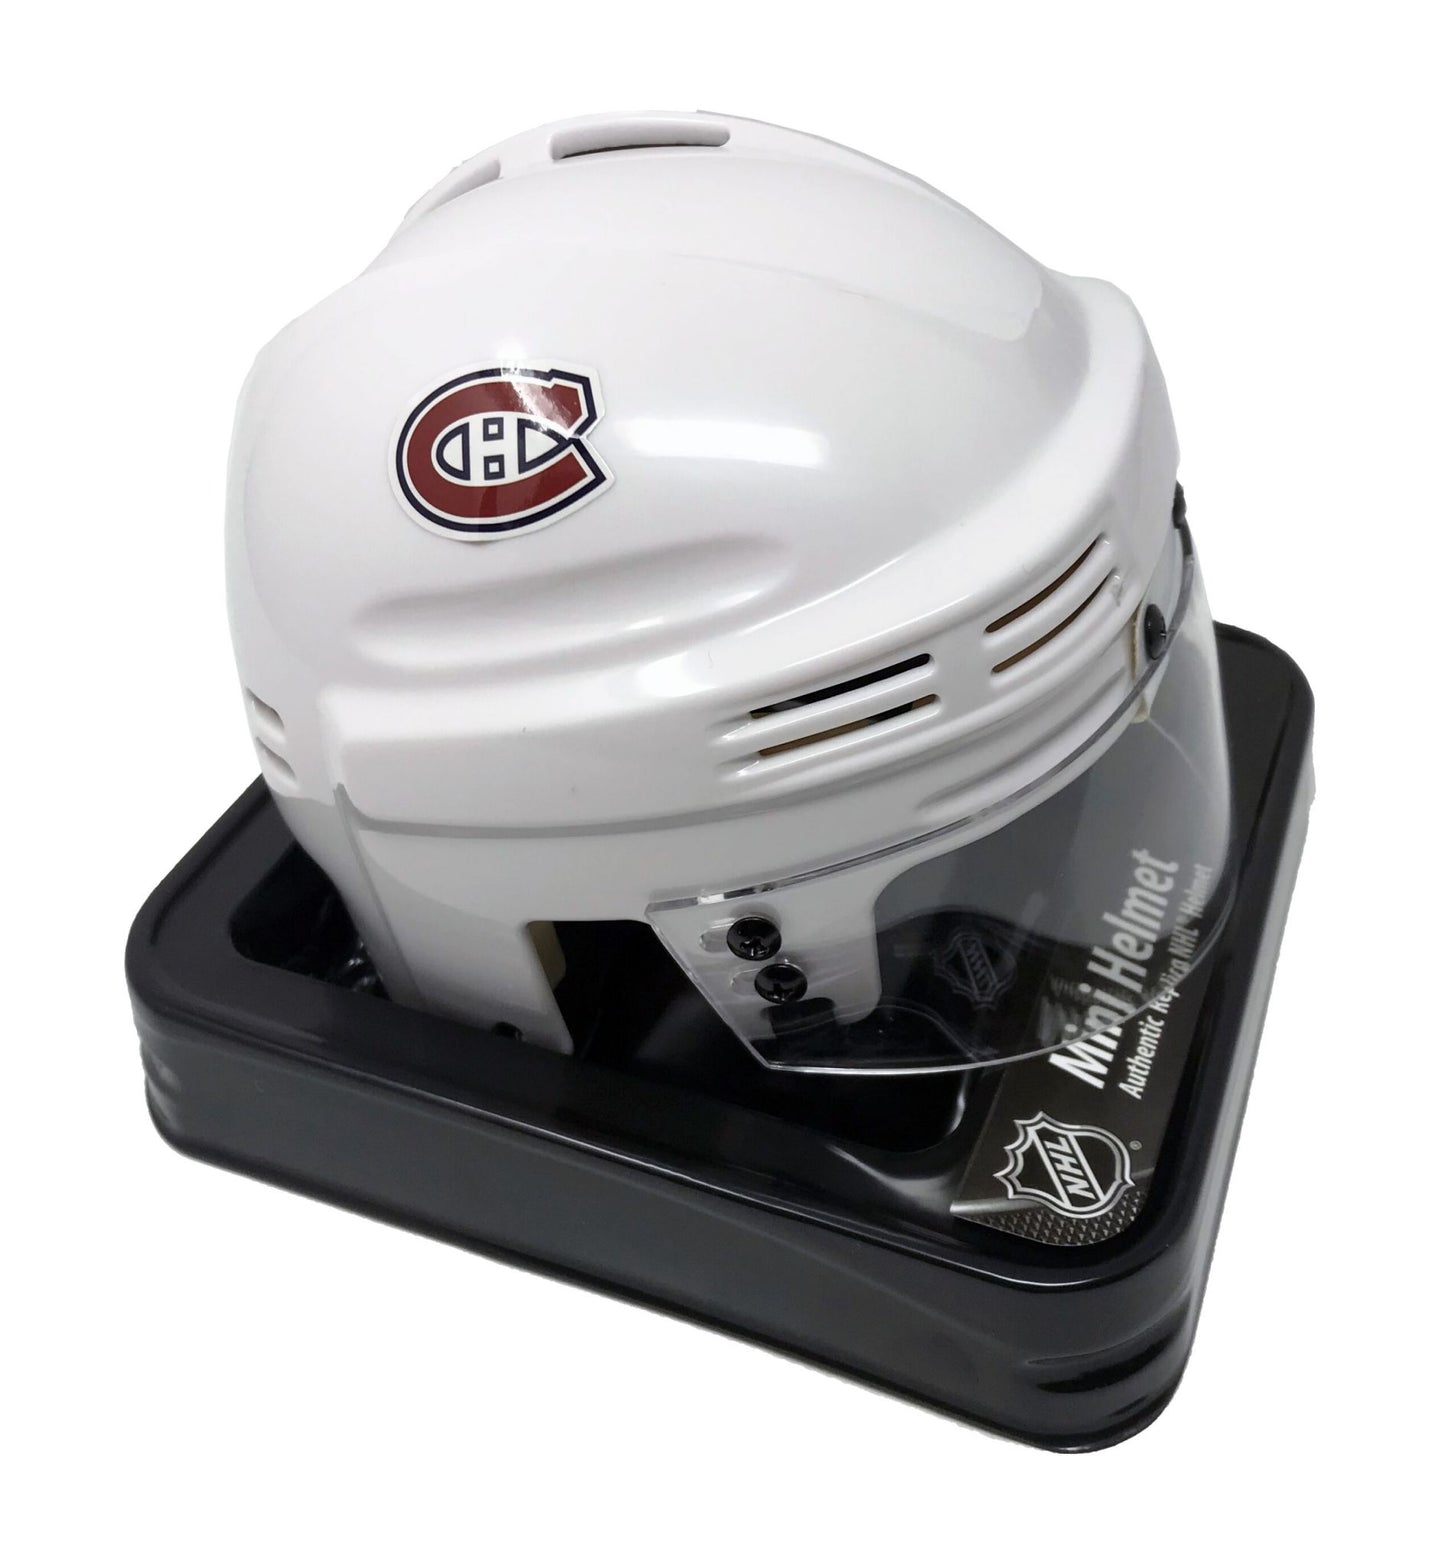 Montreal Canadiens White Unsigned Collectible Mini Hockey Helmet